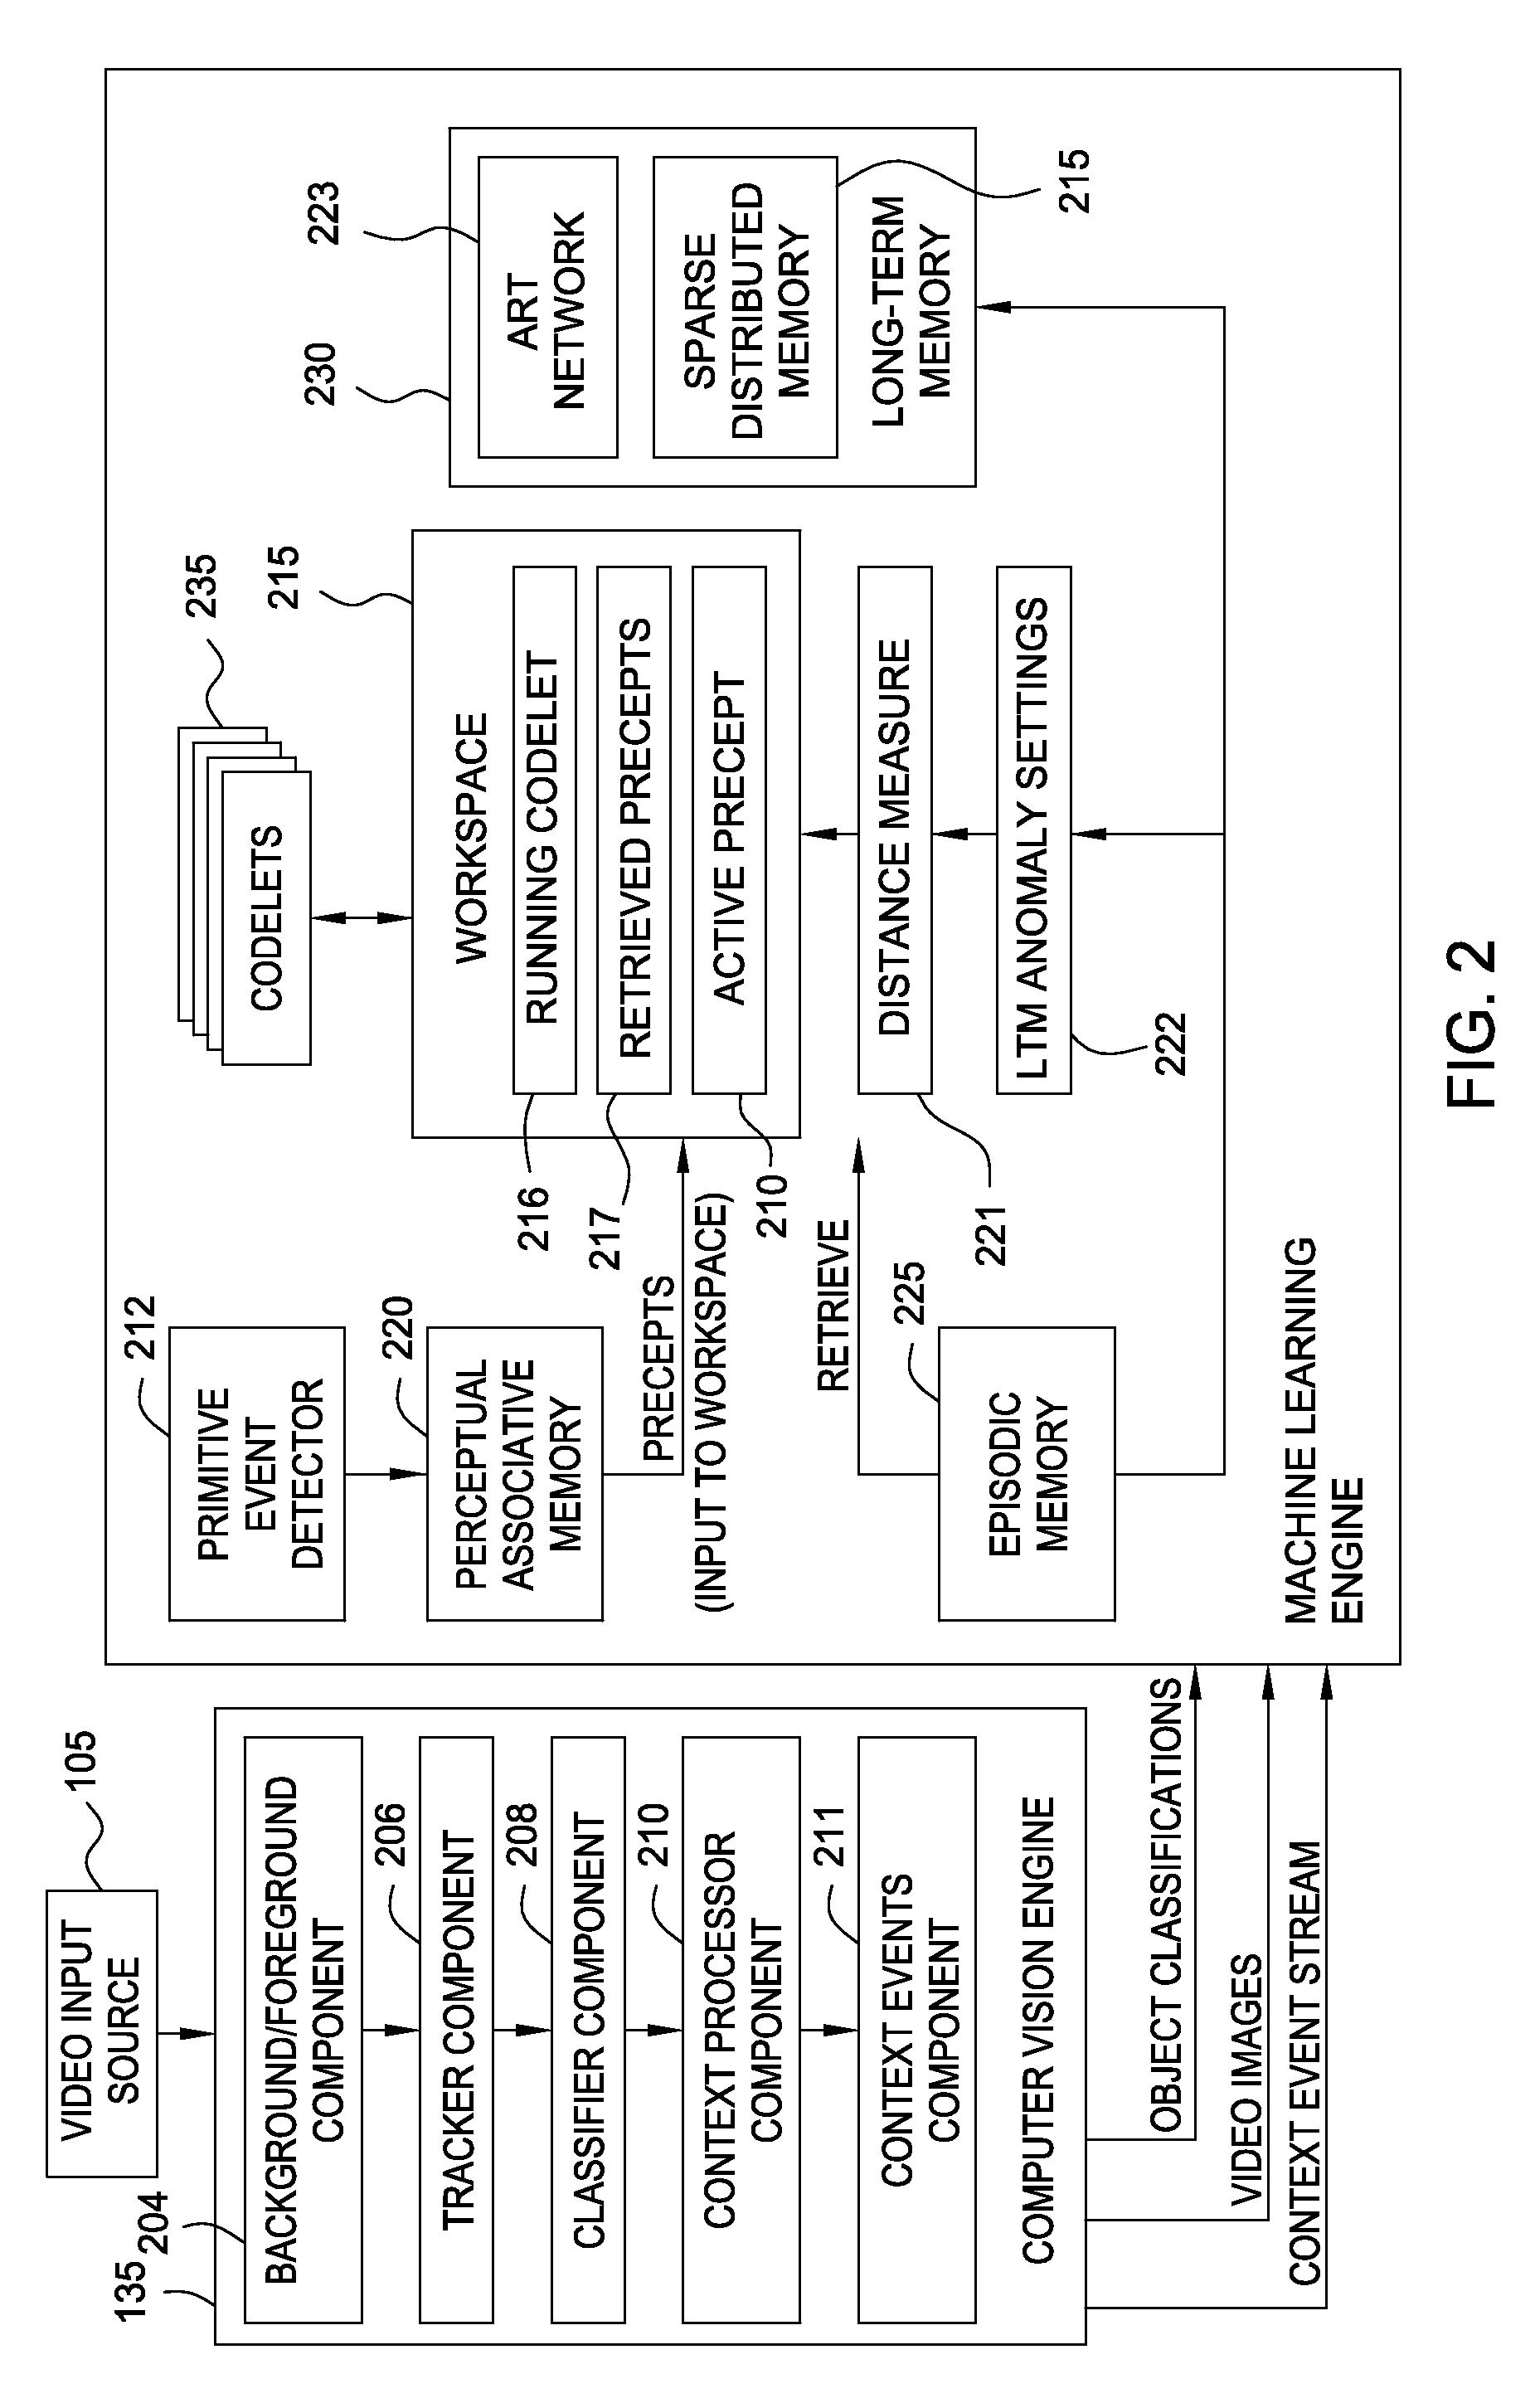 Detecting anomalous events using a long-term memory in a video analysis system